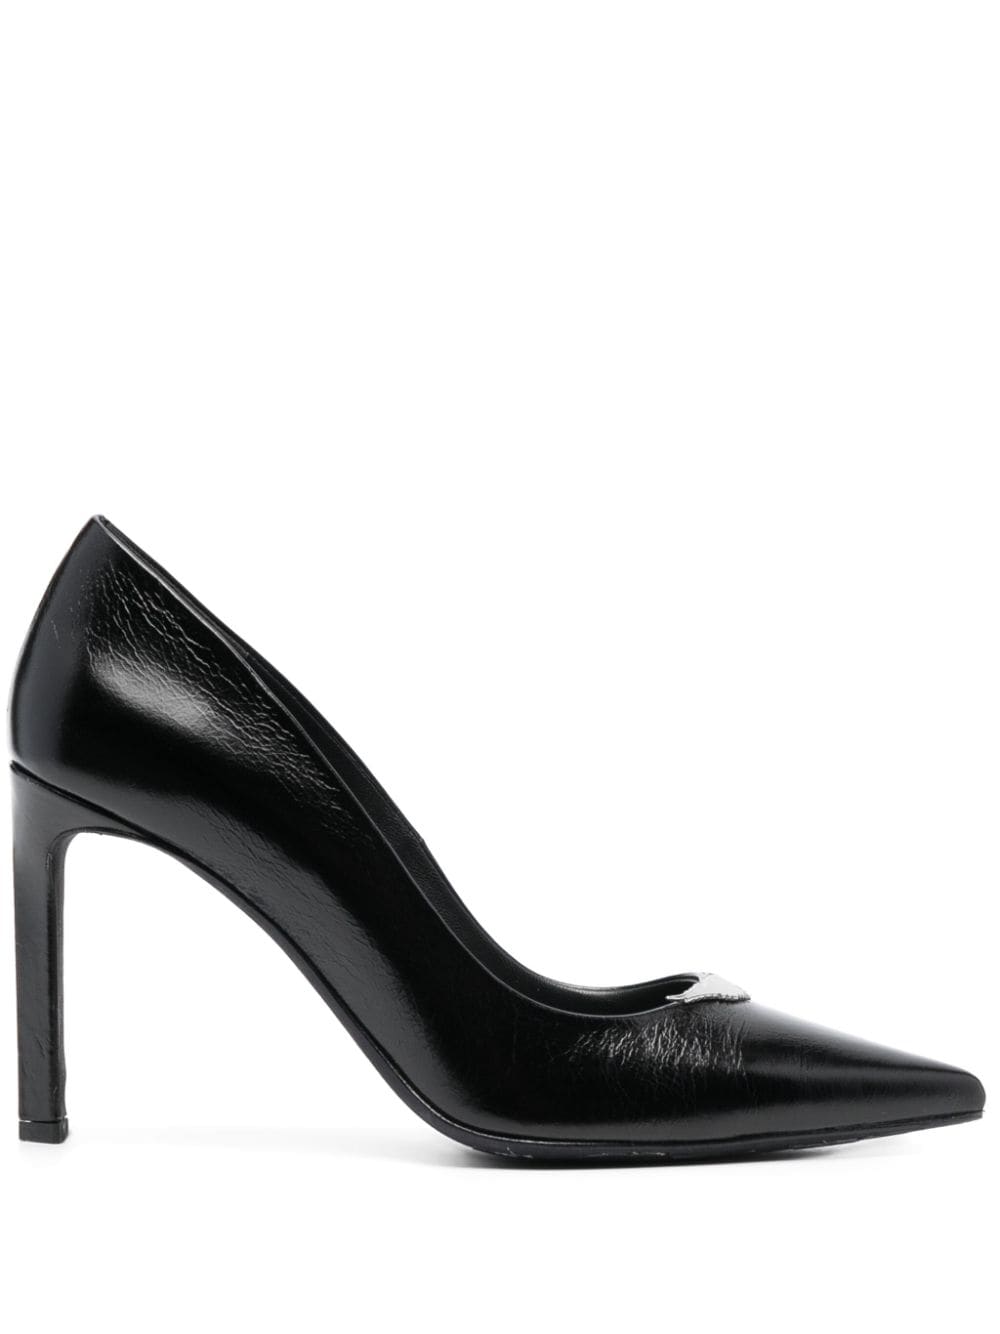 Zadig&Voltaire Perfect Vintage 100mm leather pumps